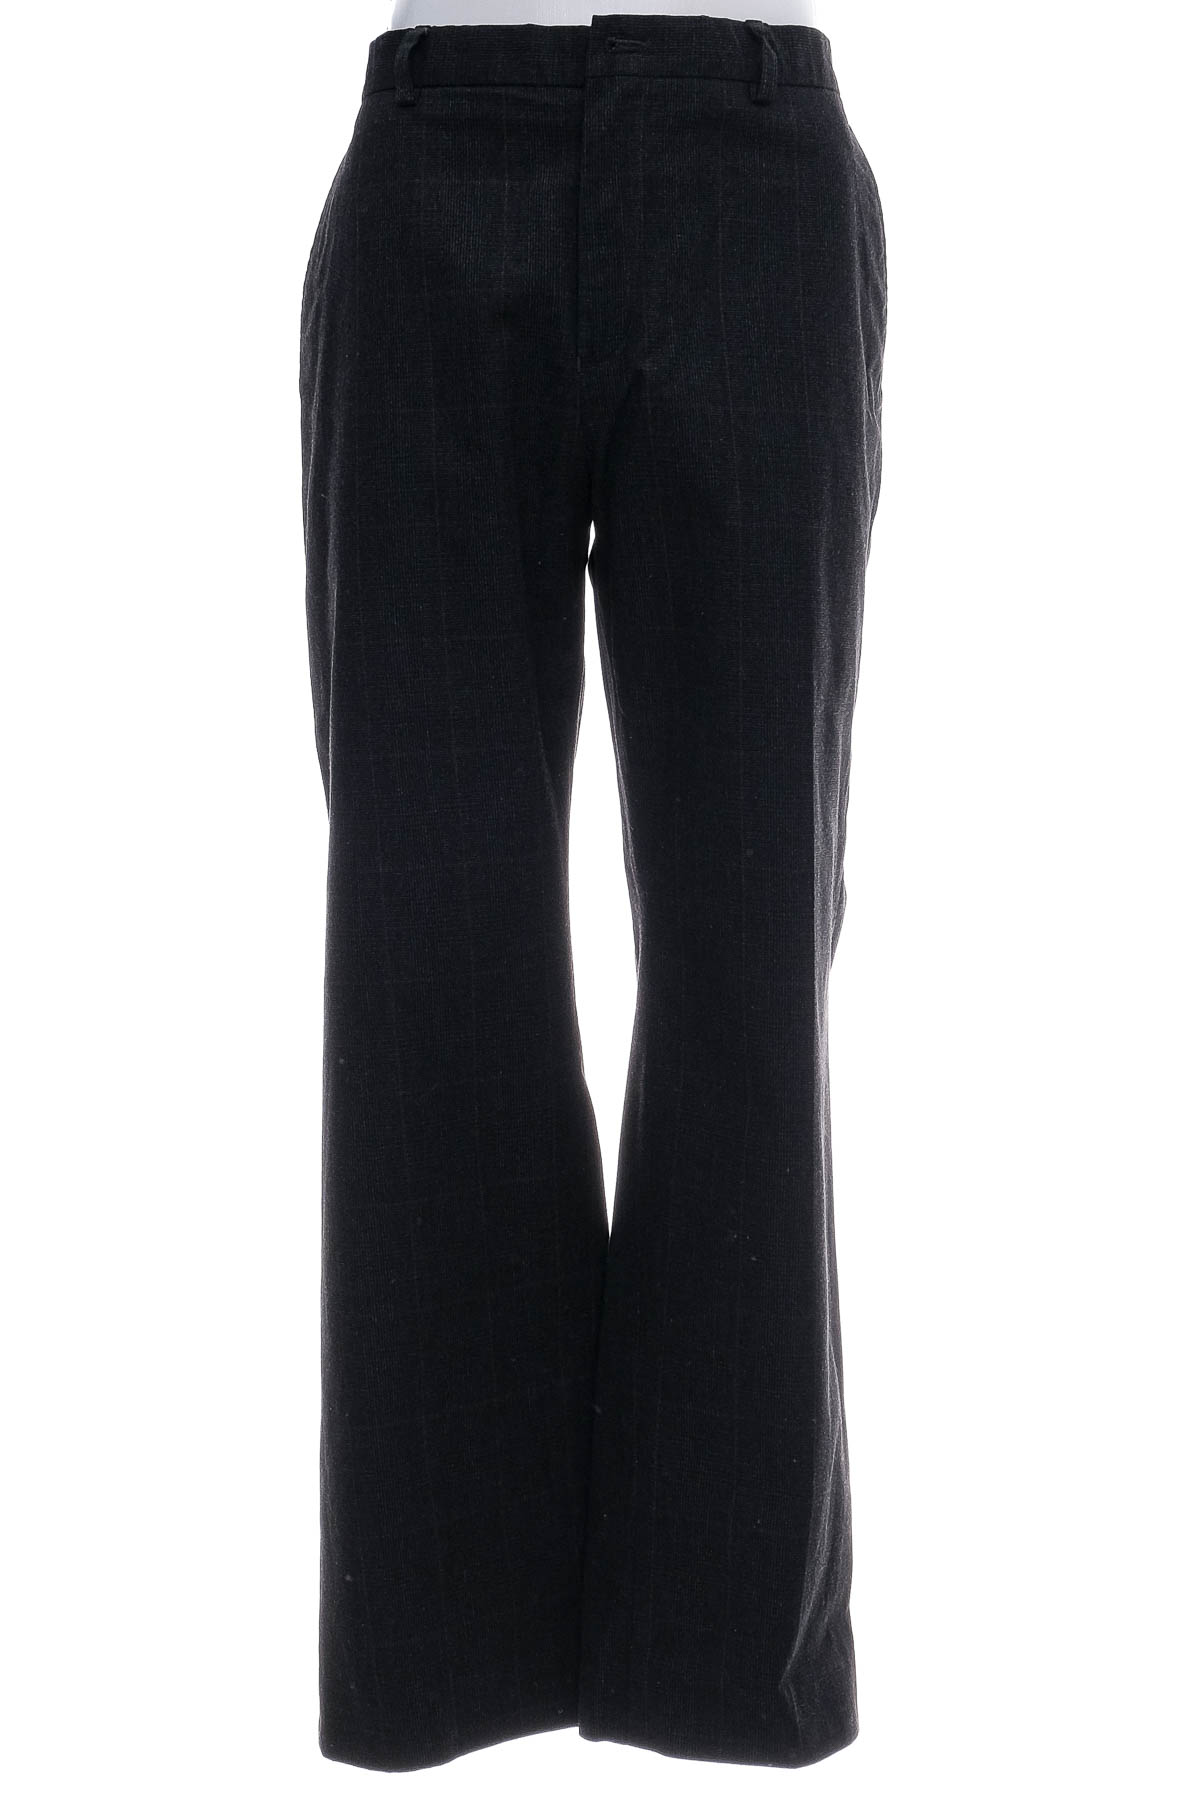 Men's trousers - Coolwater - 0